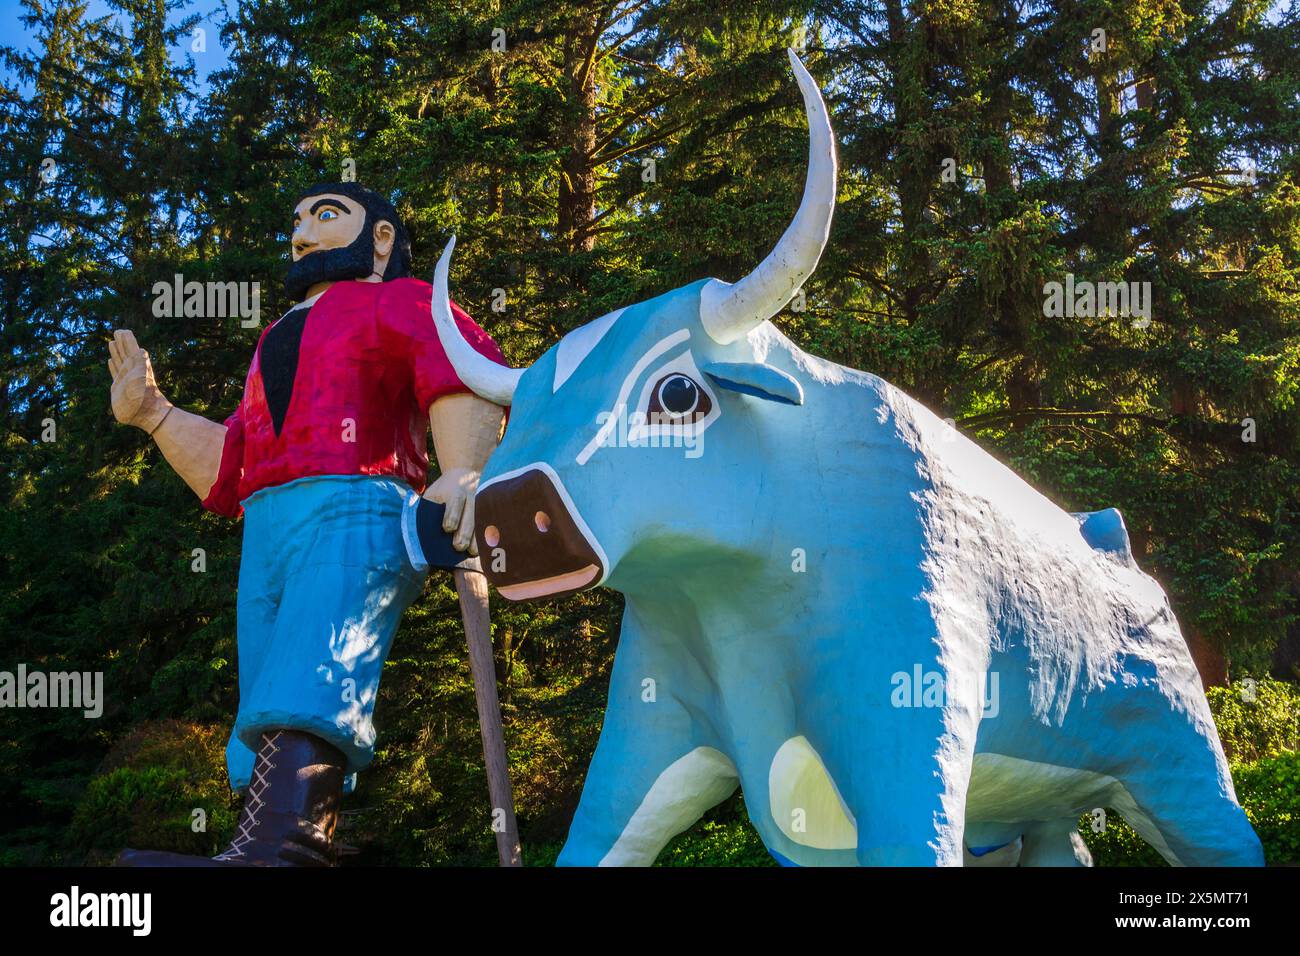 Paul Bunyan and ox Babe statues at Trees of Mystery roadside attraction, Klamath, California, USA. (Editorial Use Only) Stock Photo